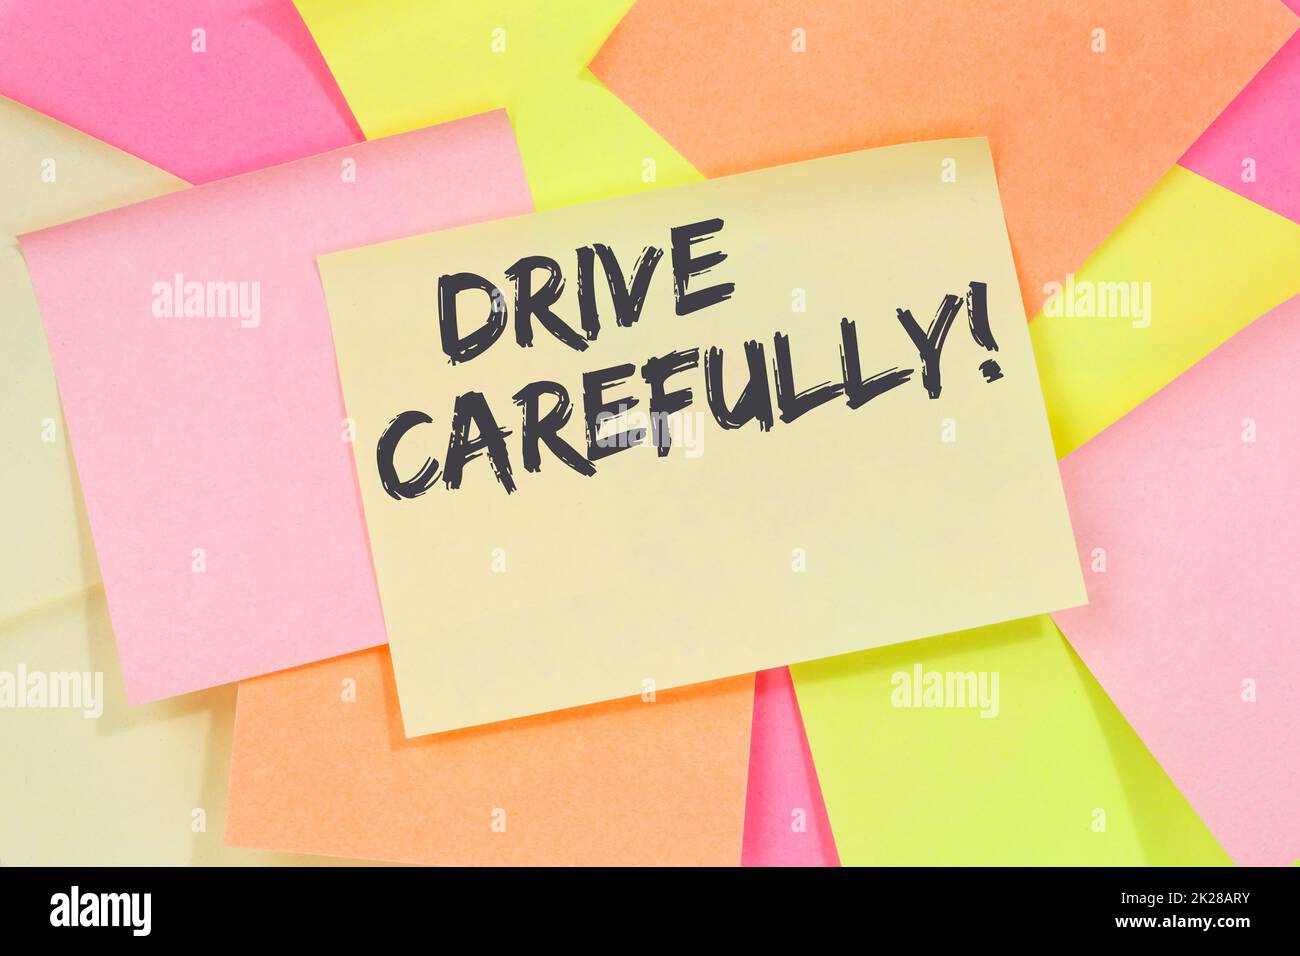 Drive carefully driving car accident traffic business concept note paper Stock Photo